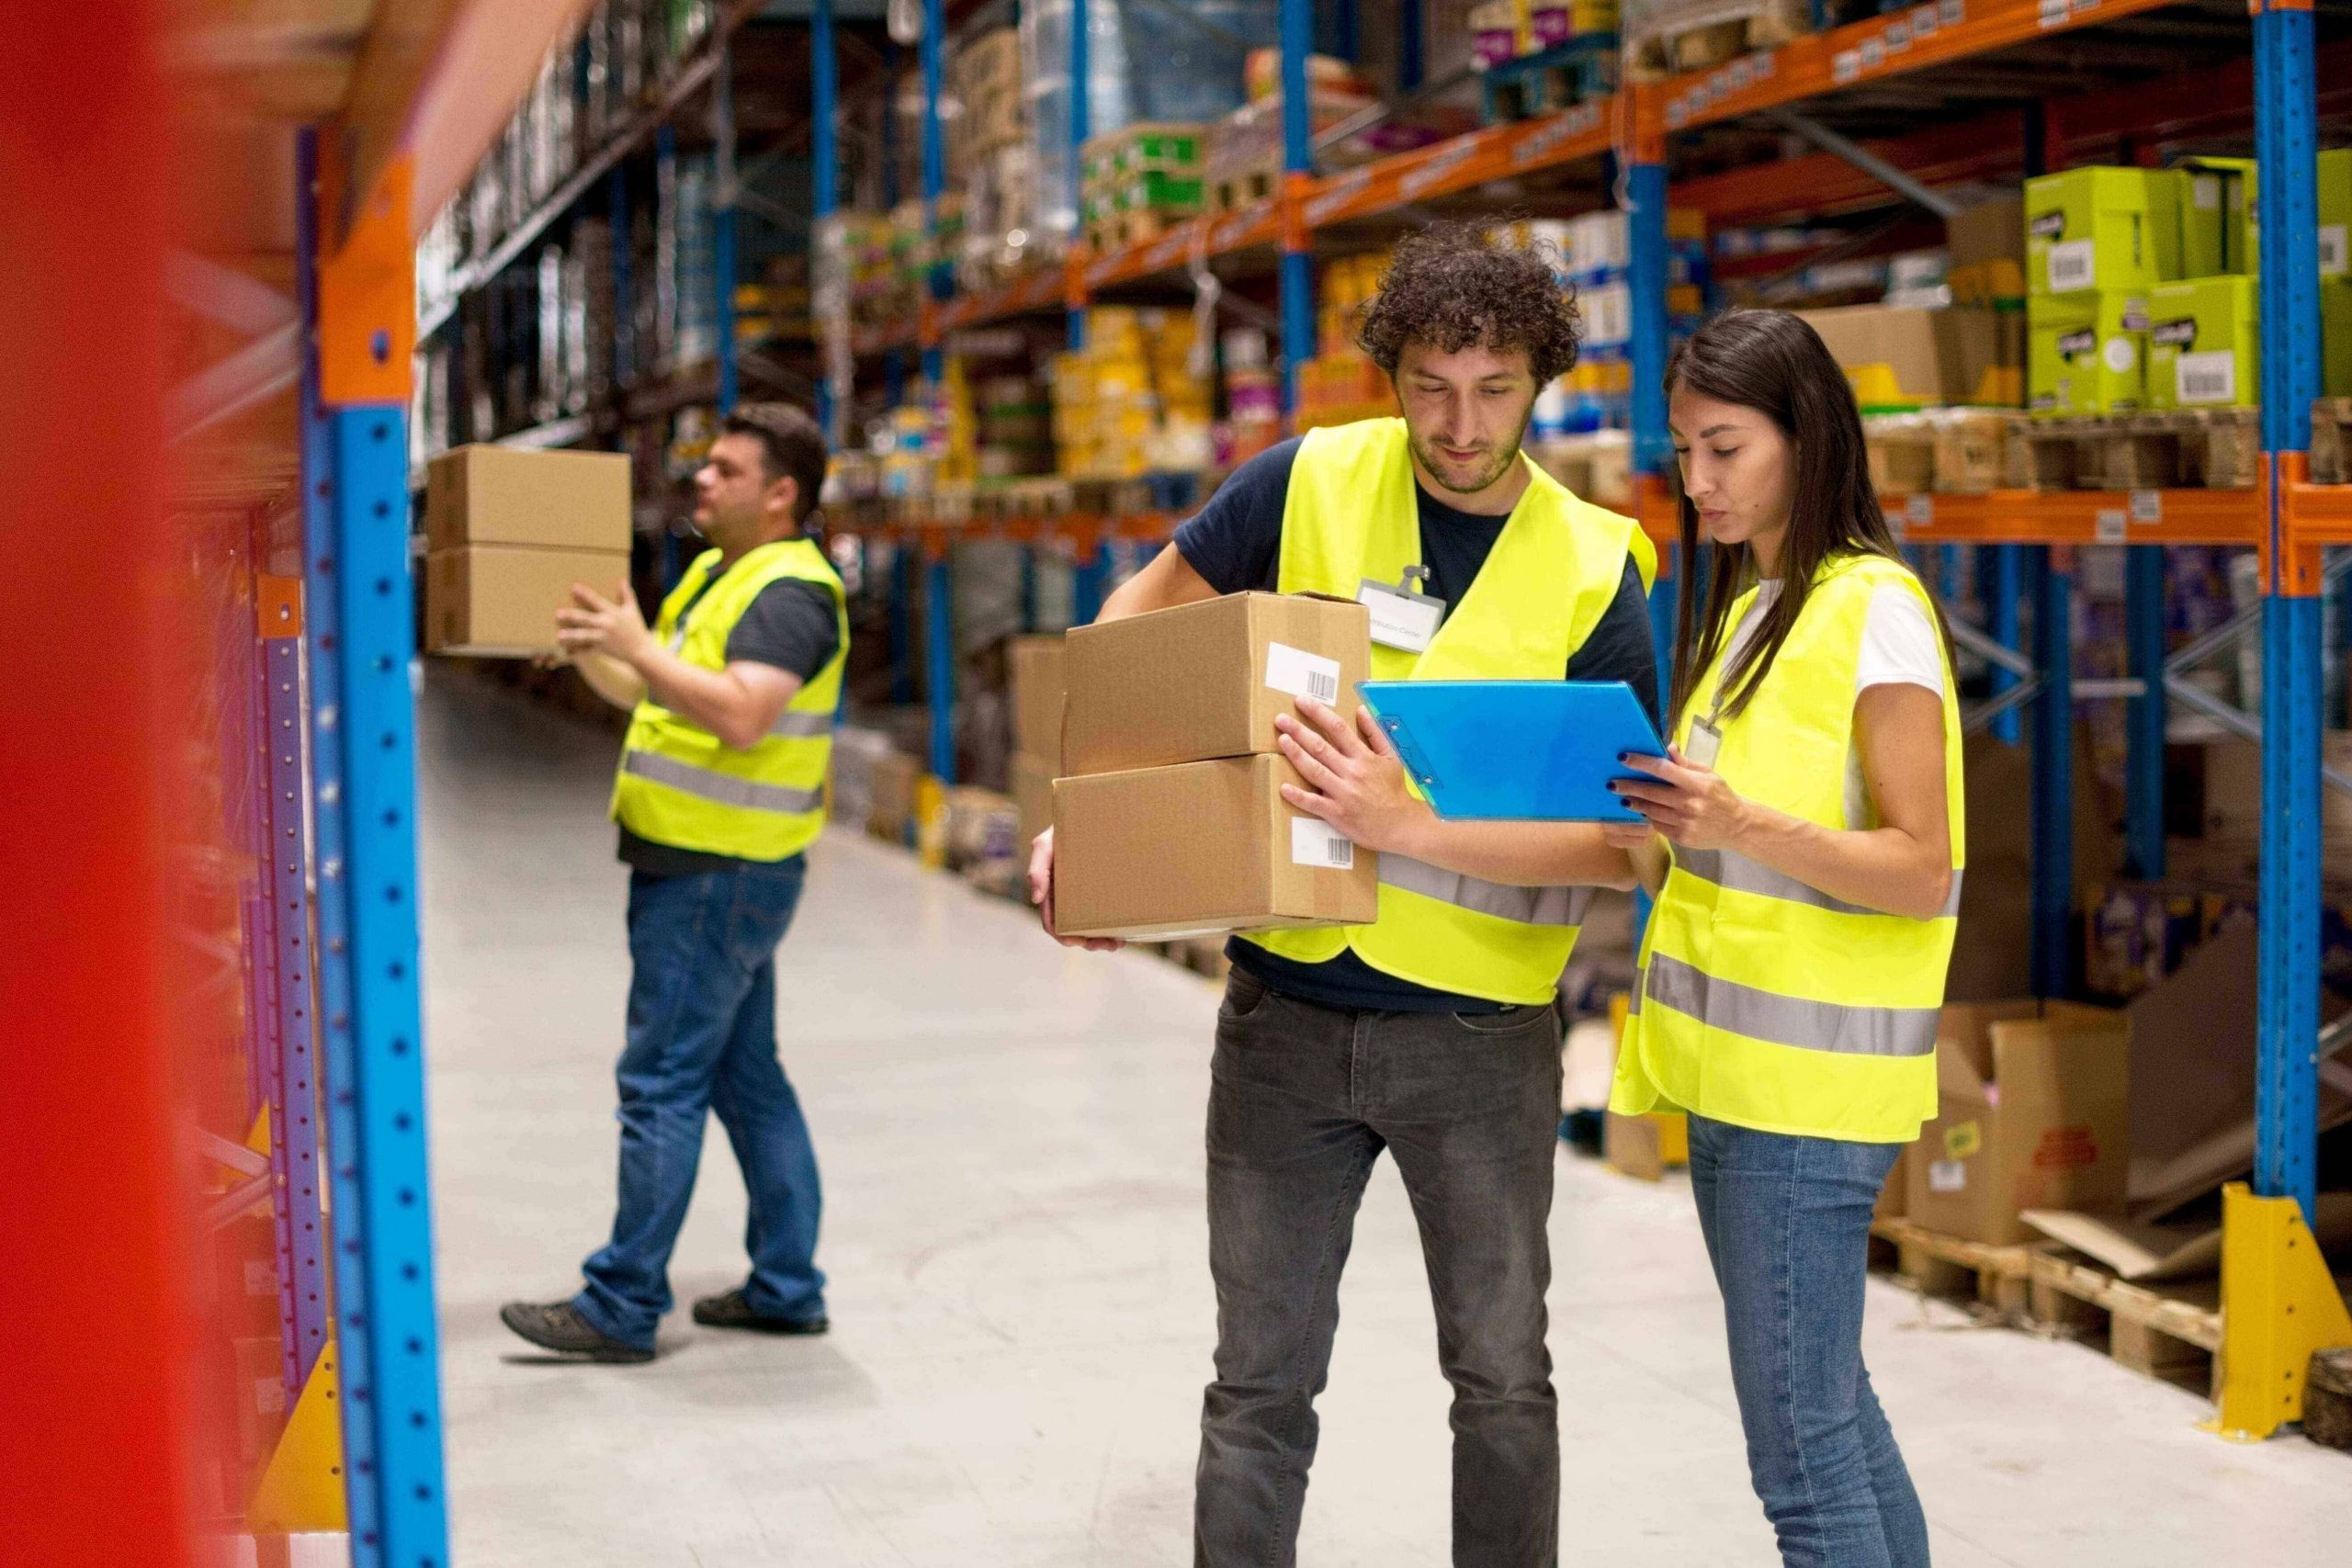 Three warehouse workers collaborate using a 3PL inventory management system to move their stock.